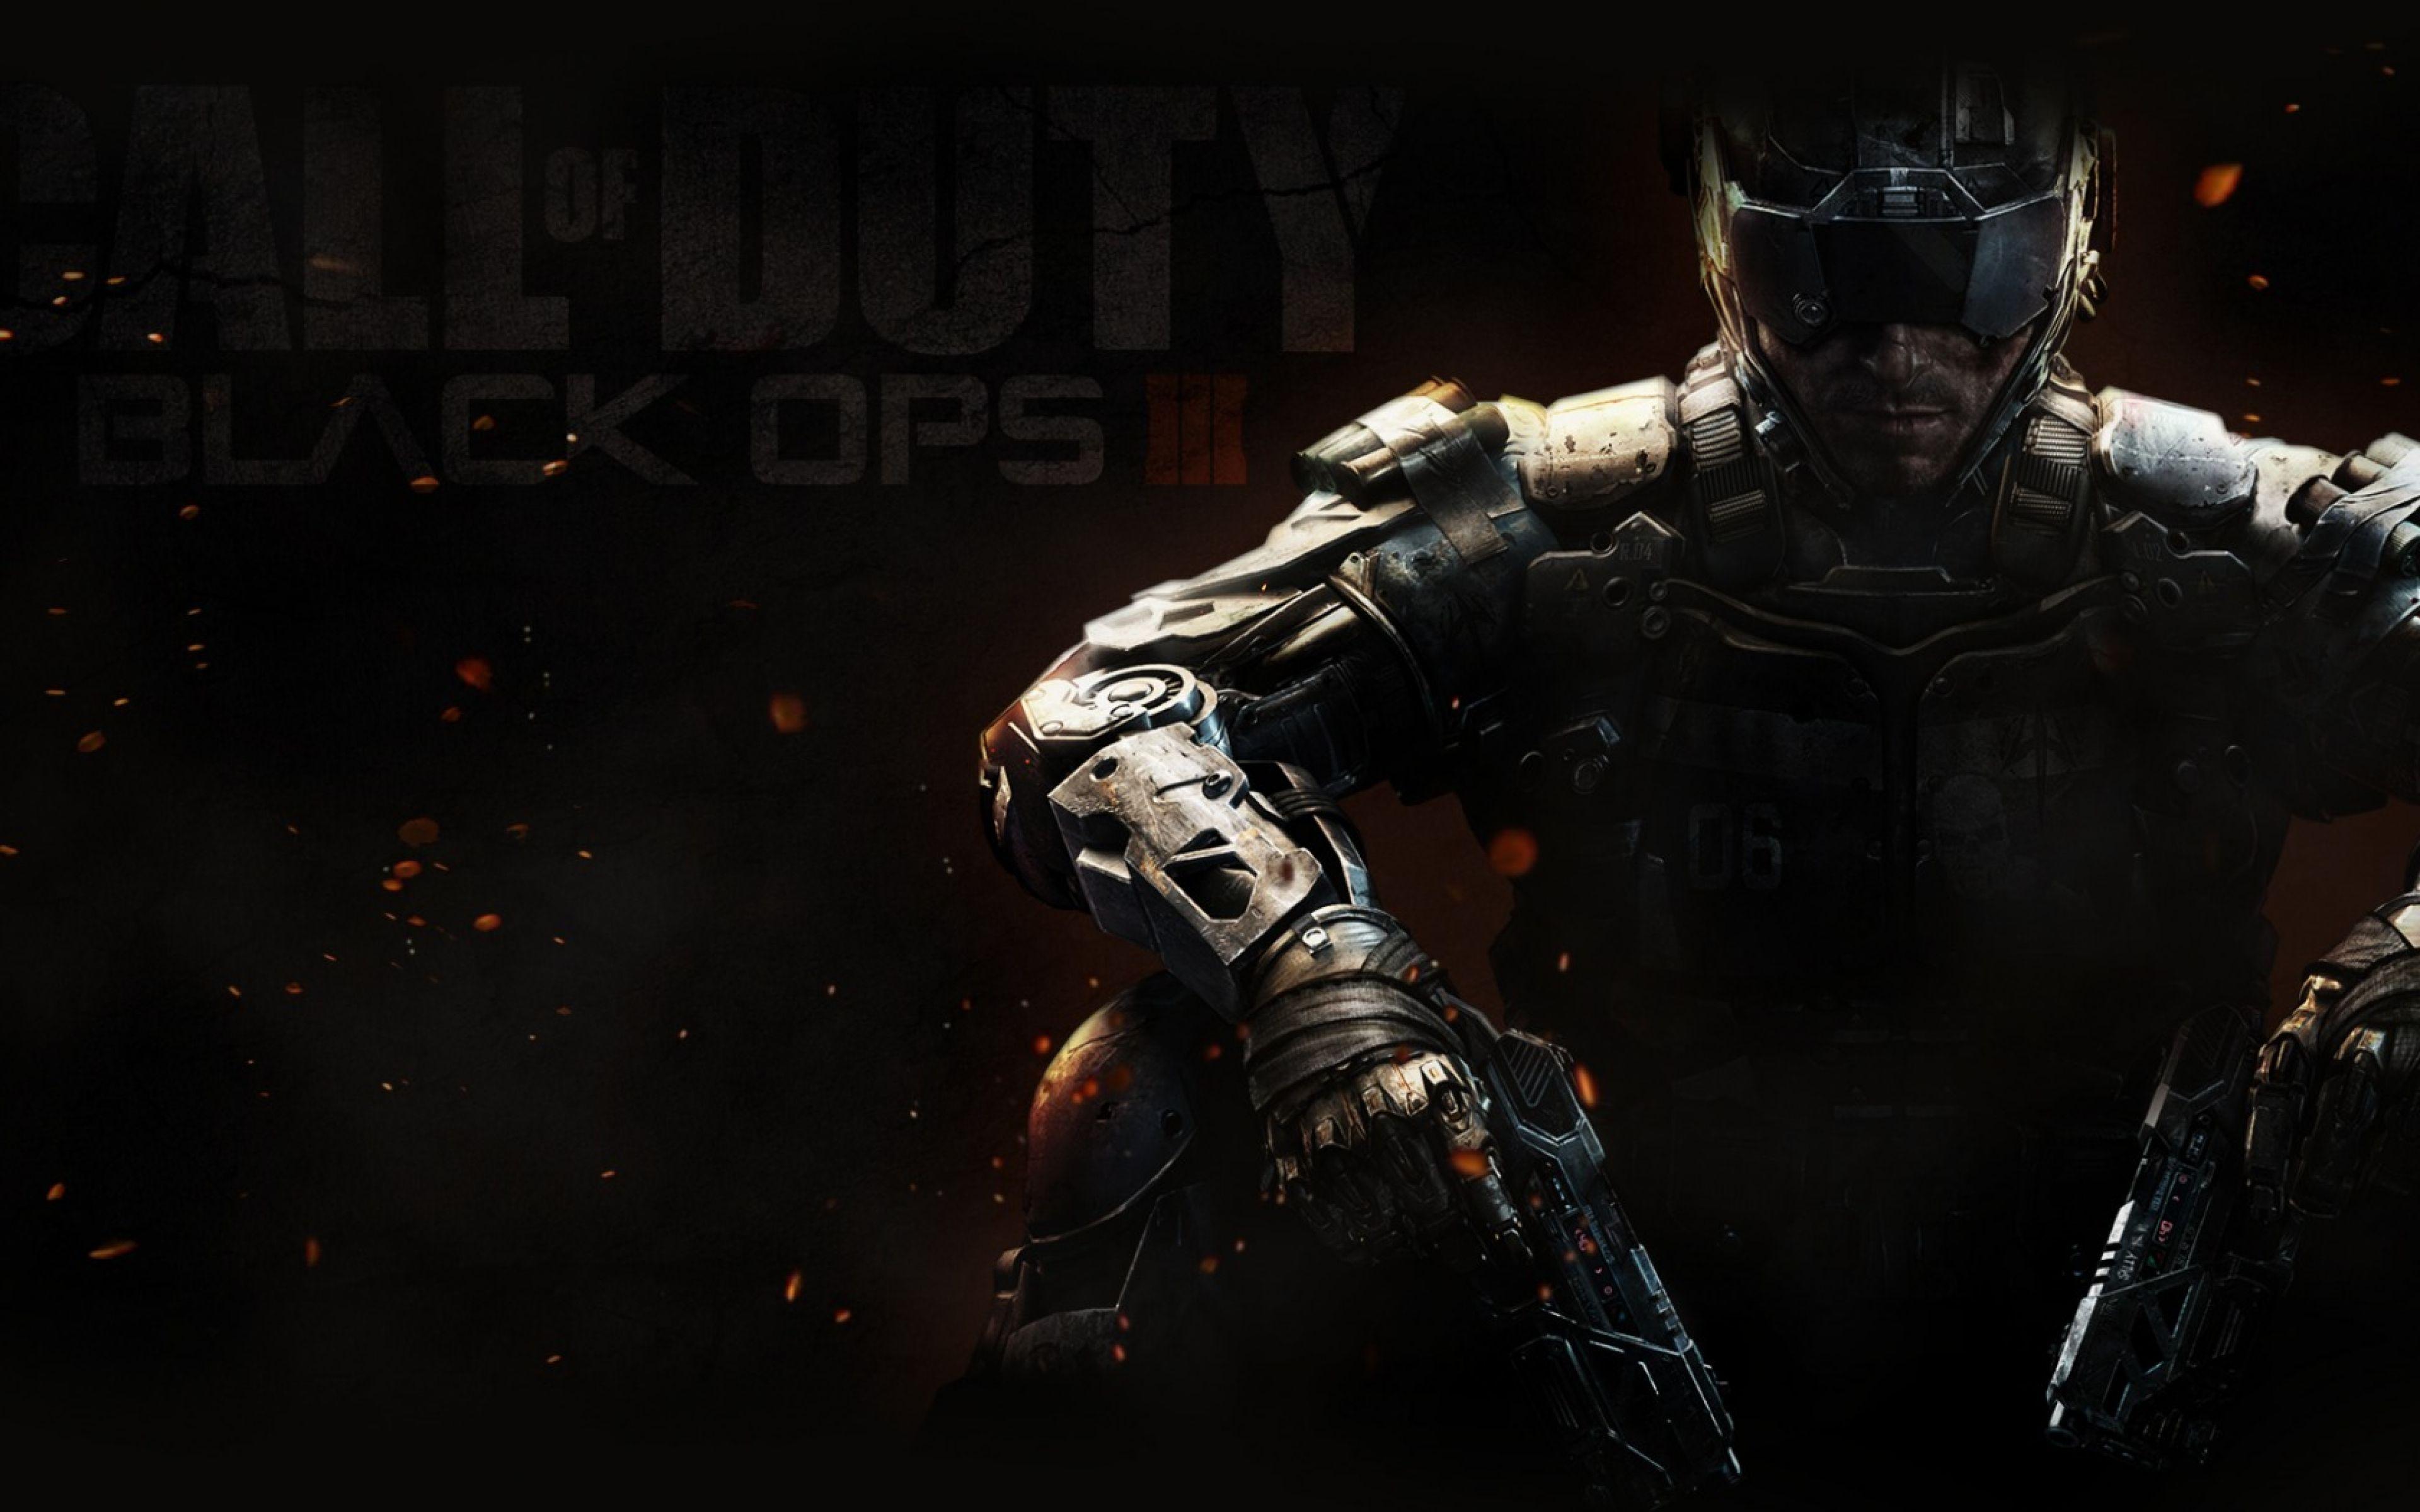 Download Wallpaper 3840x2400 Call of duty black ops Call